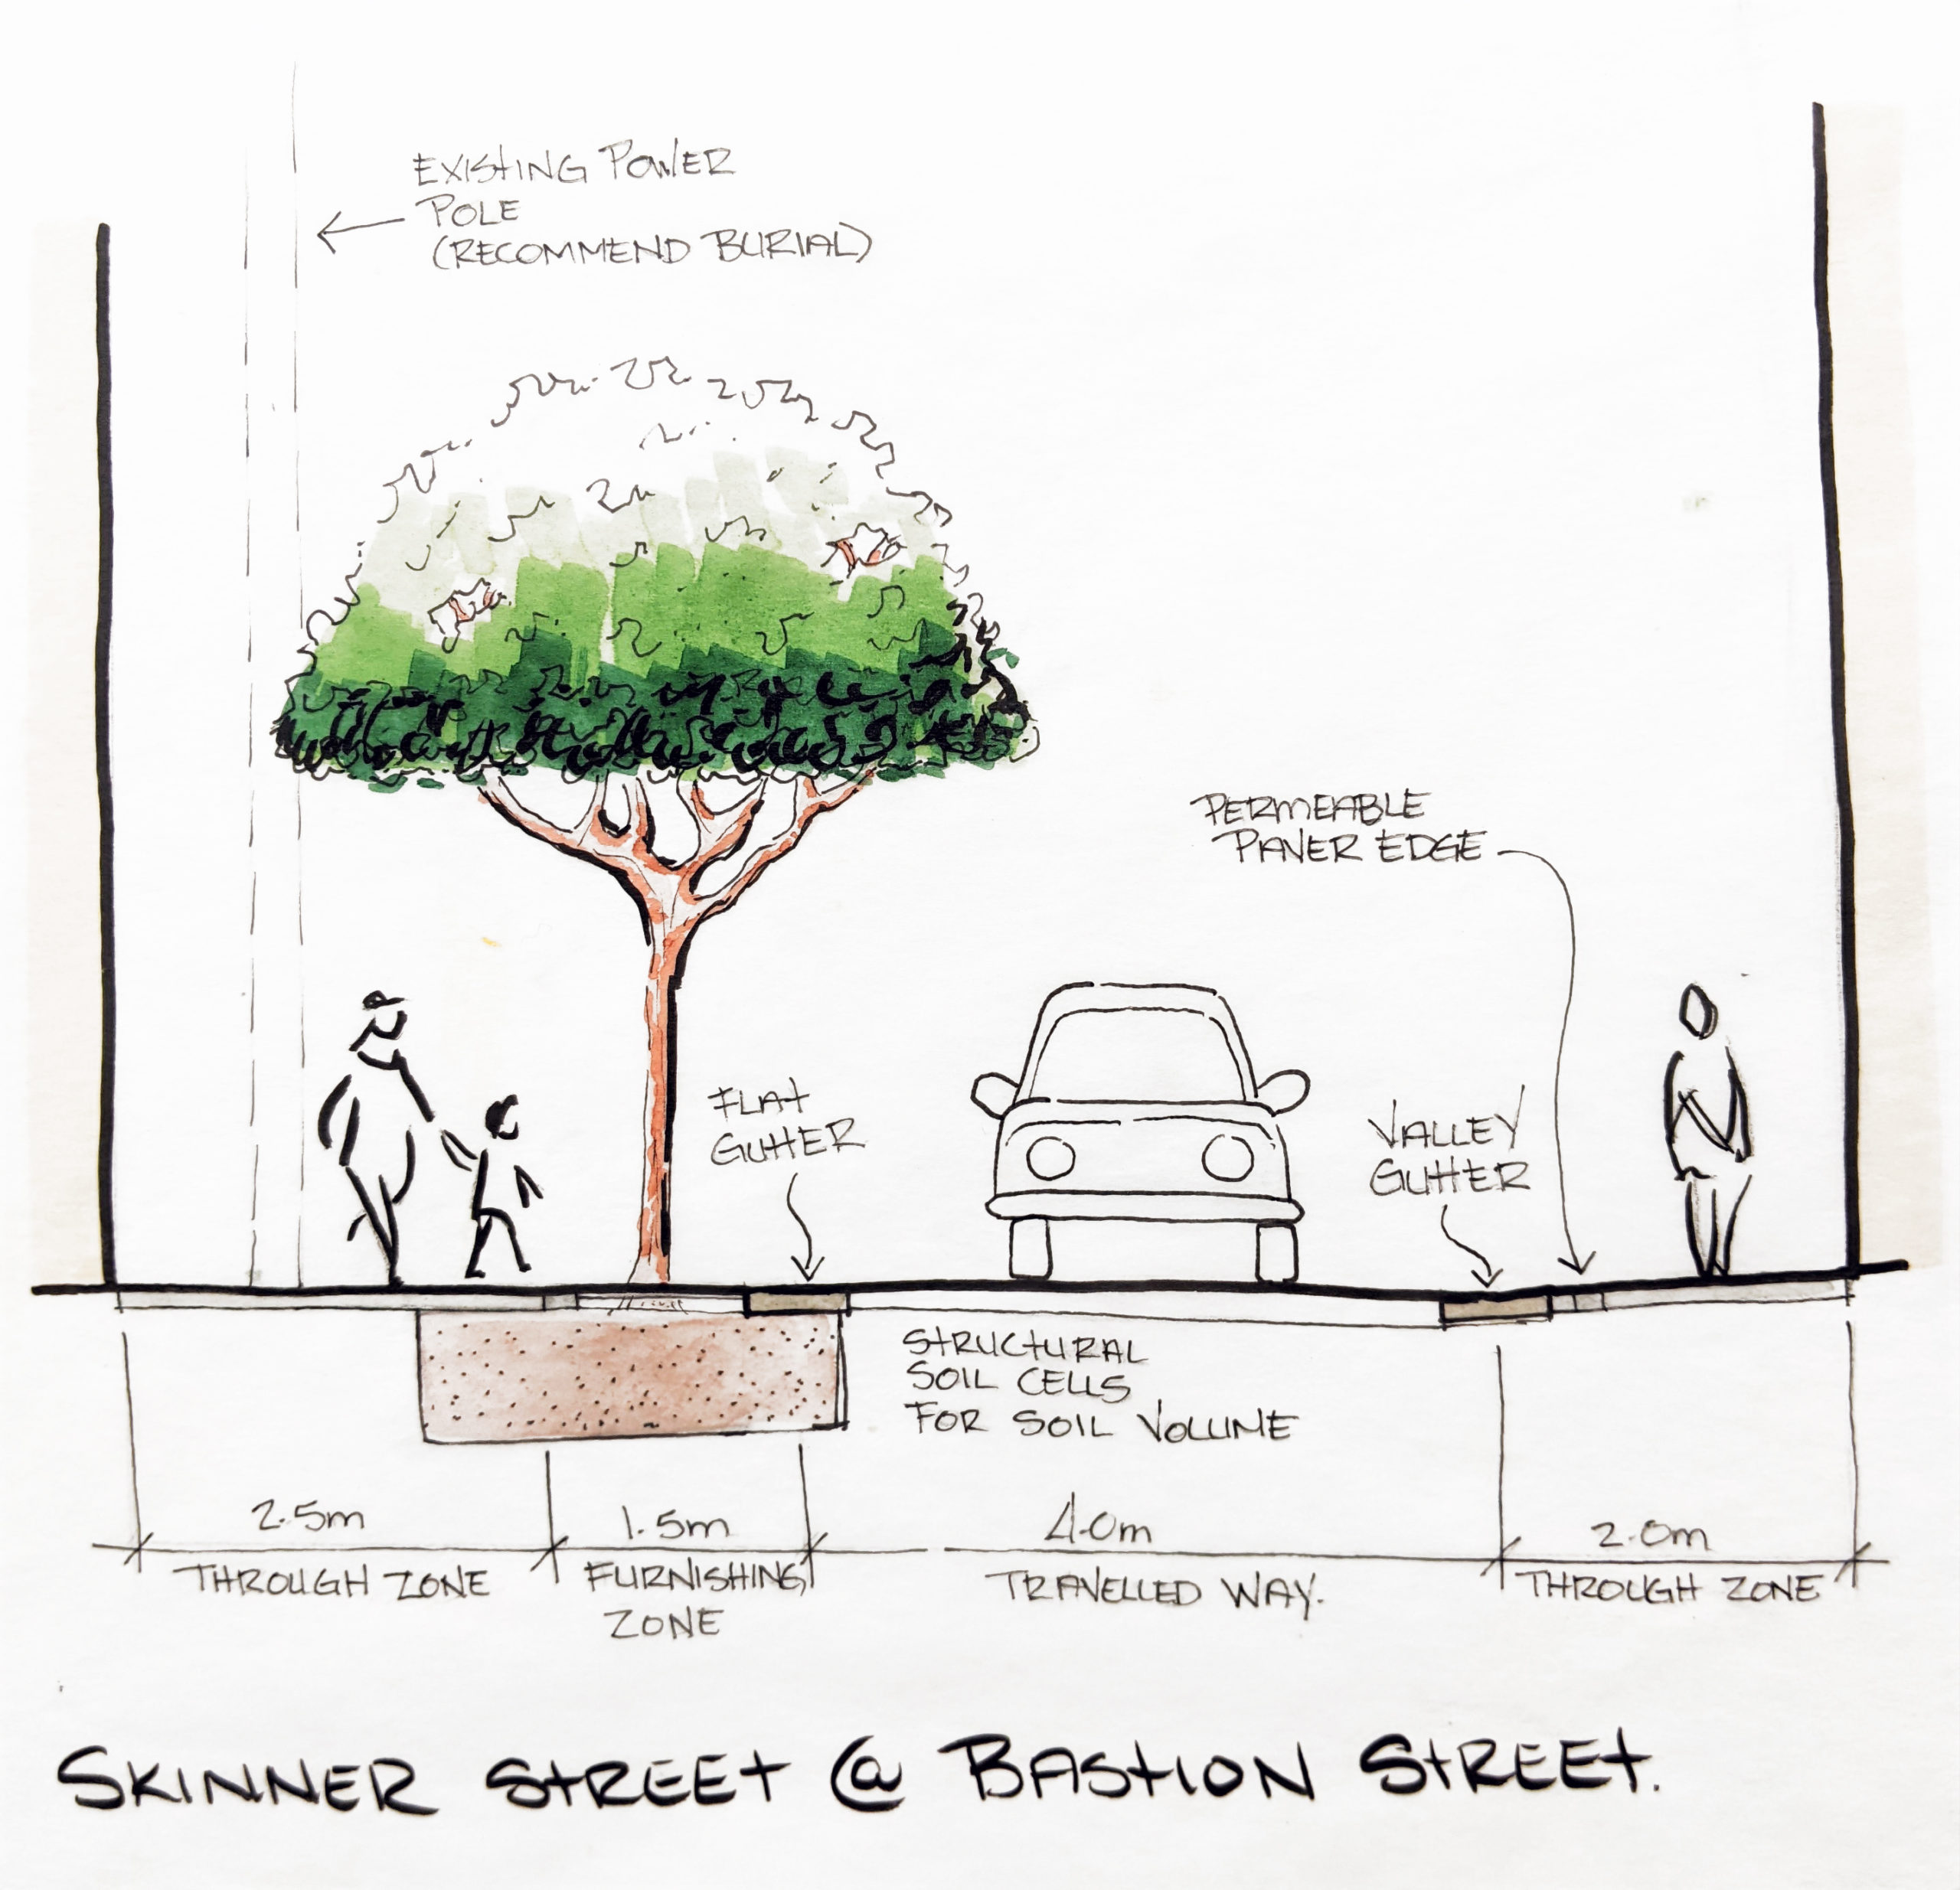 A hand-drawn sketch of one option for reconfiguring Skinner Street at Bastion Street